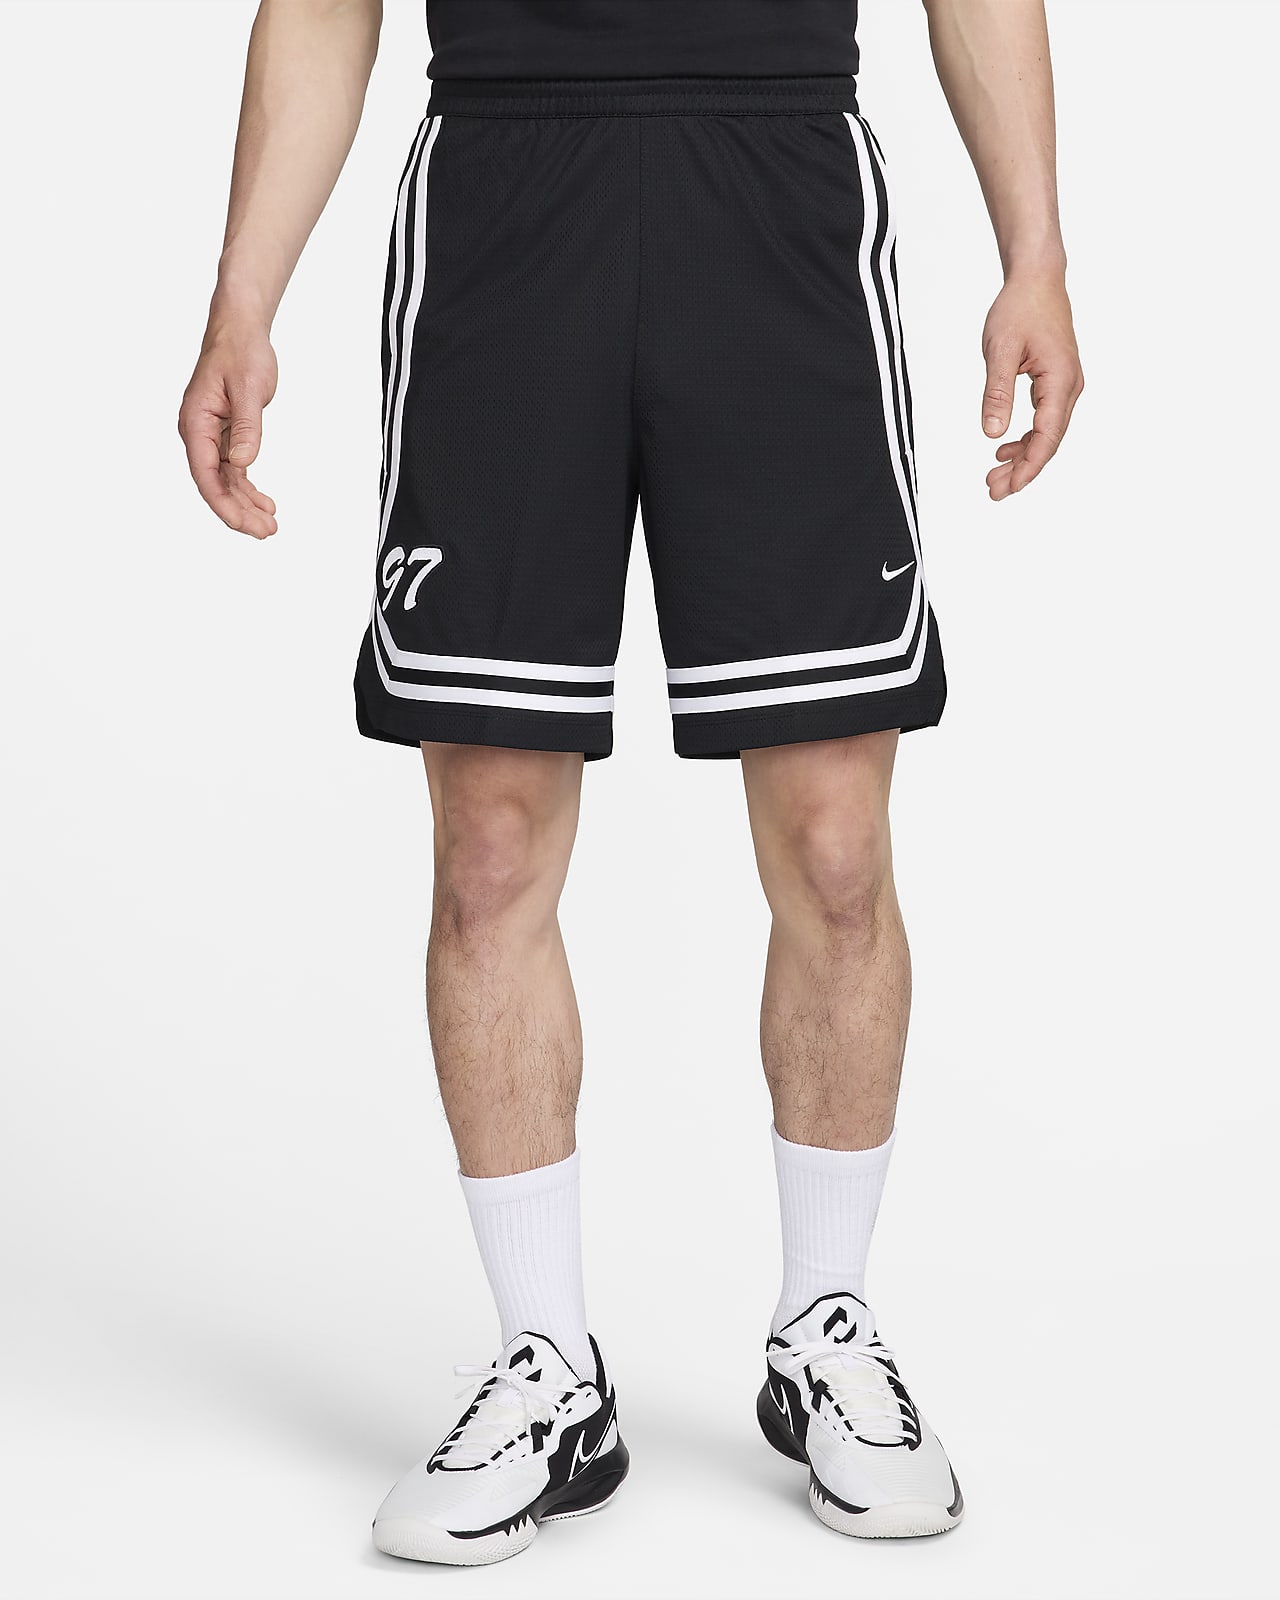 Nike DNA Crossover Men's Dri-FIT 8" Basketball Shorts